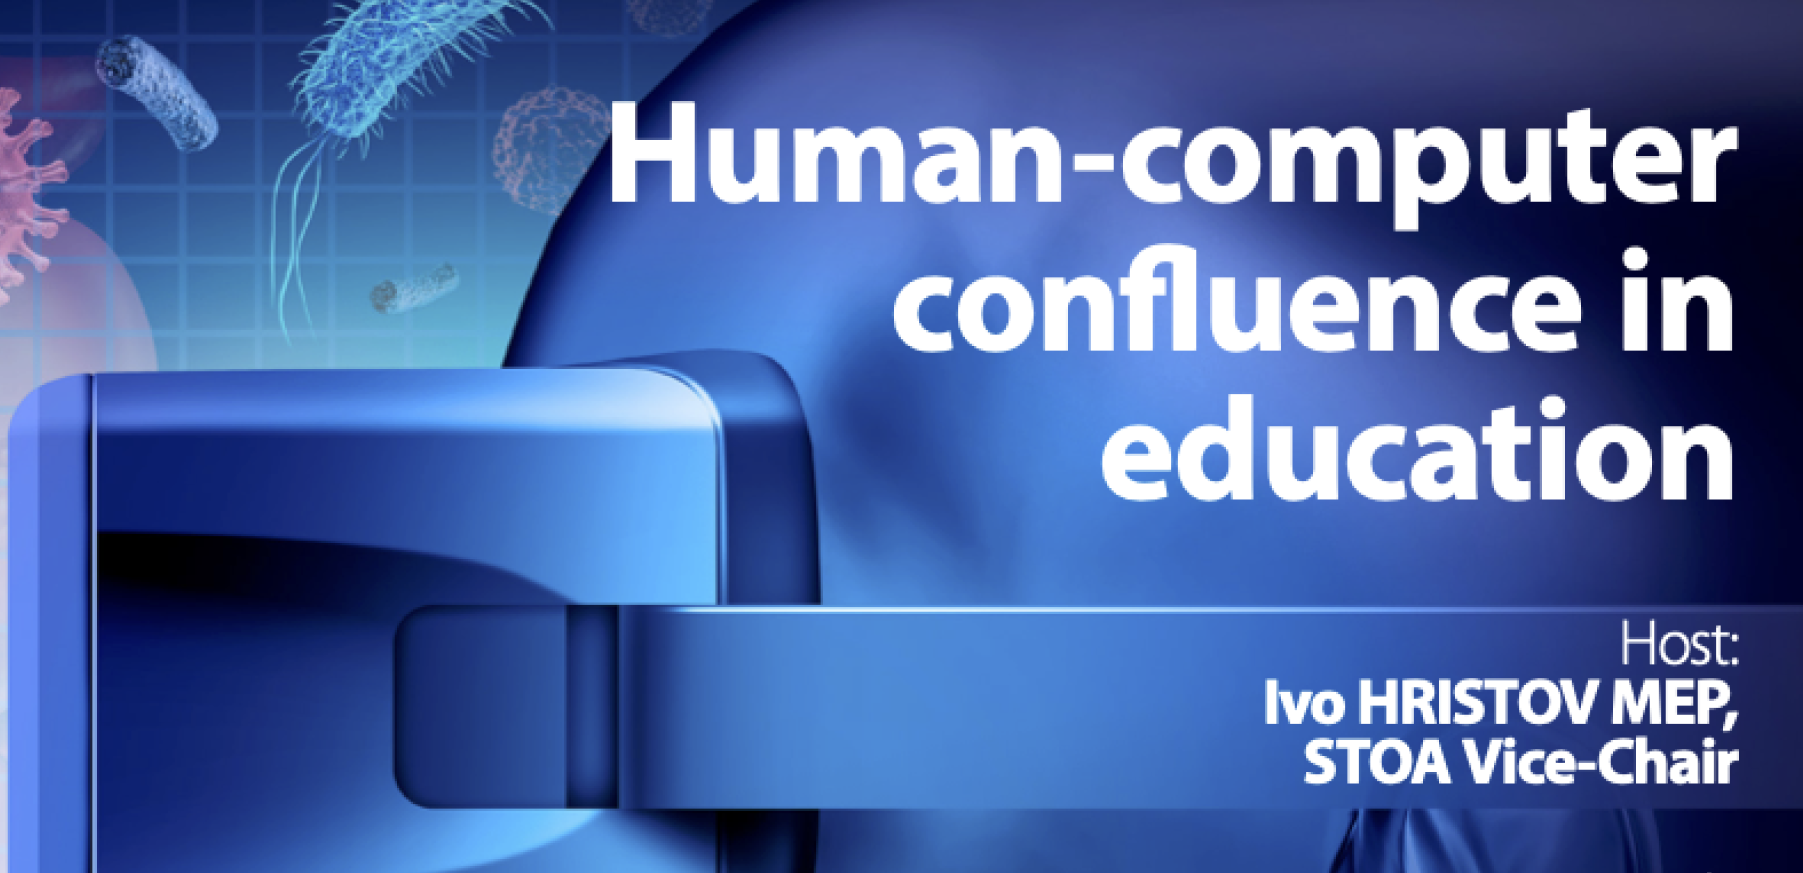 Human-computer confluence in education